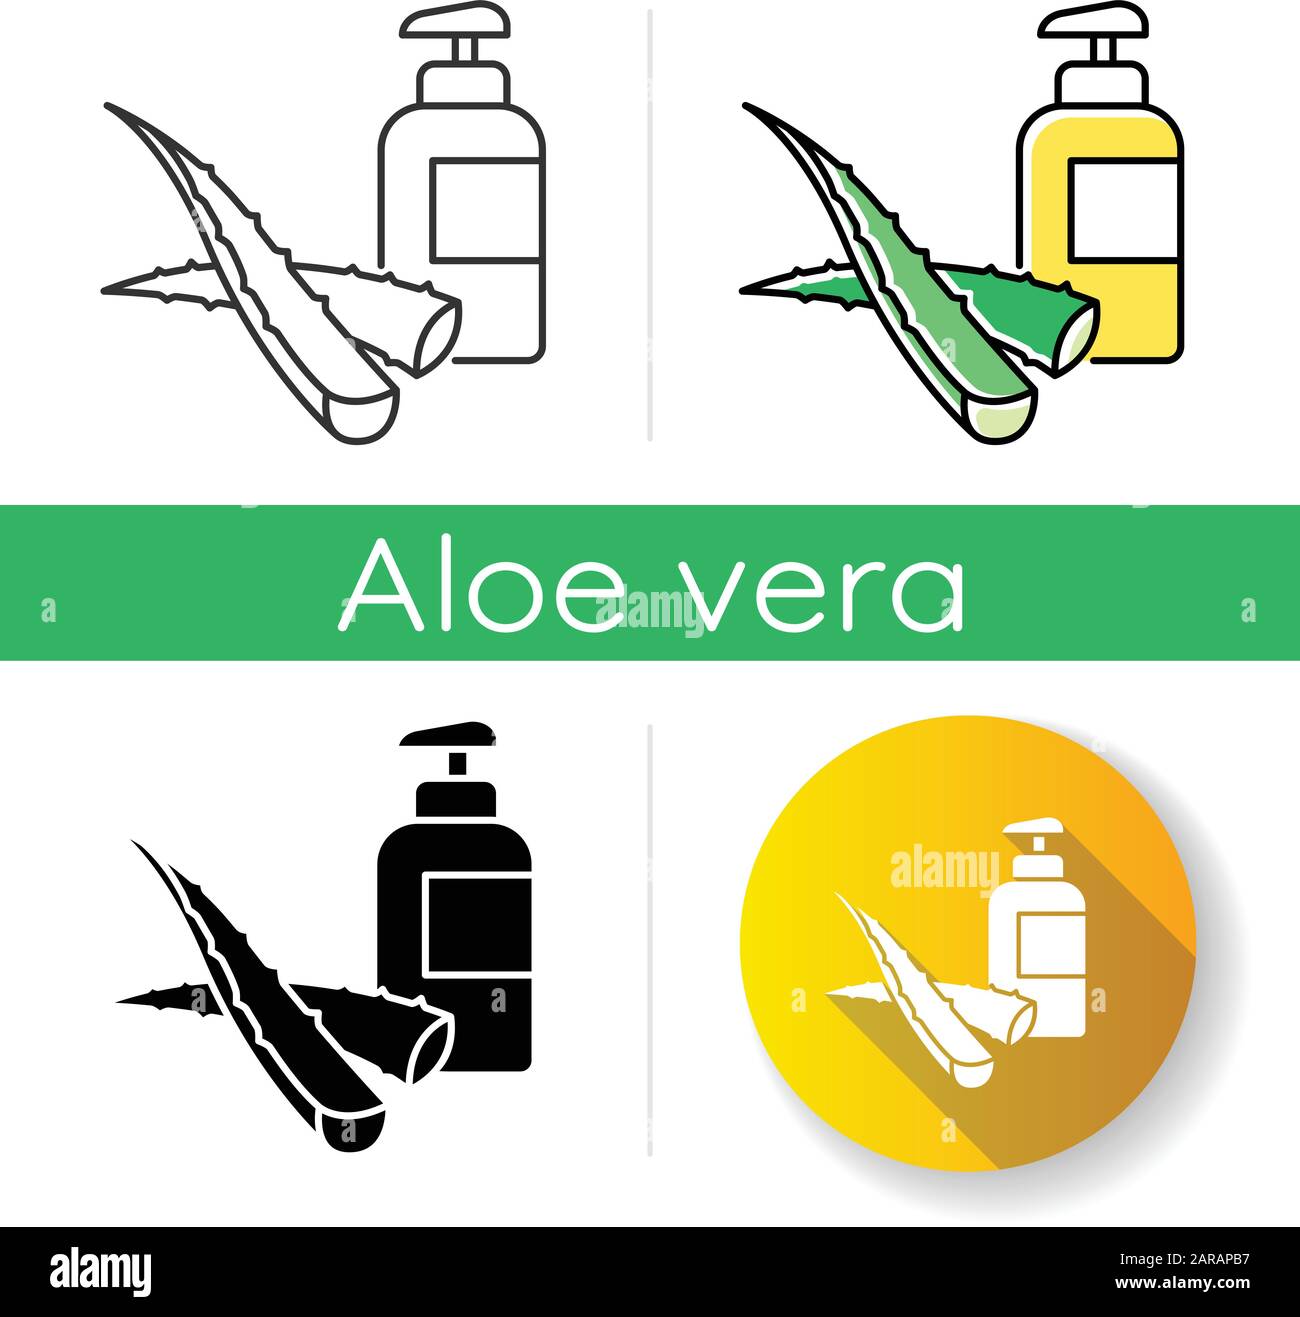 Herbal lotion icon. Plant based gel and natural liquid soap. Organic bathing product. Dermatology. Moisturizer with aloe vera extract. Linear black an Stock Vector